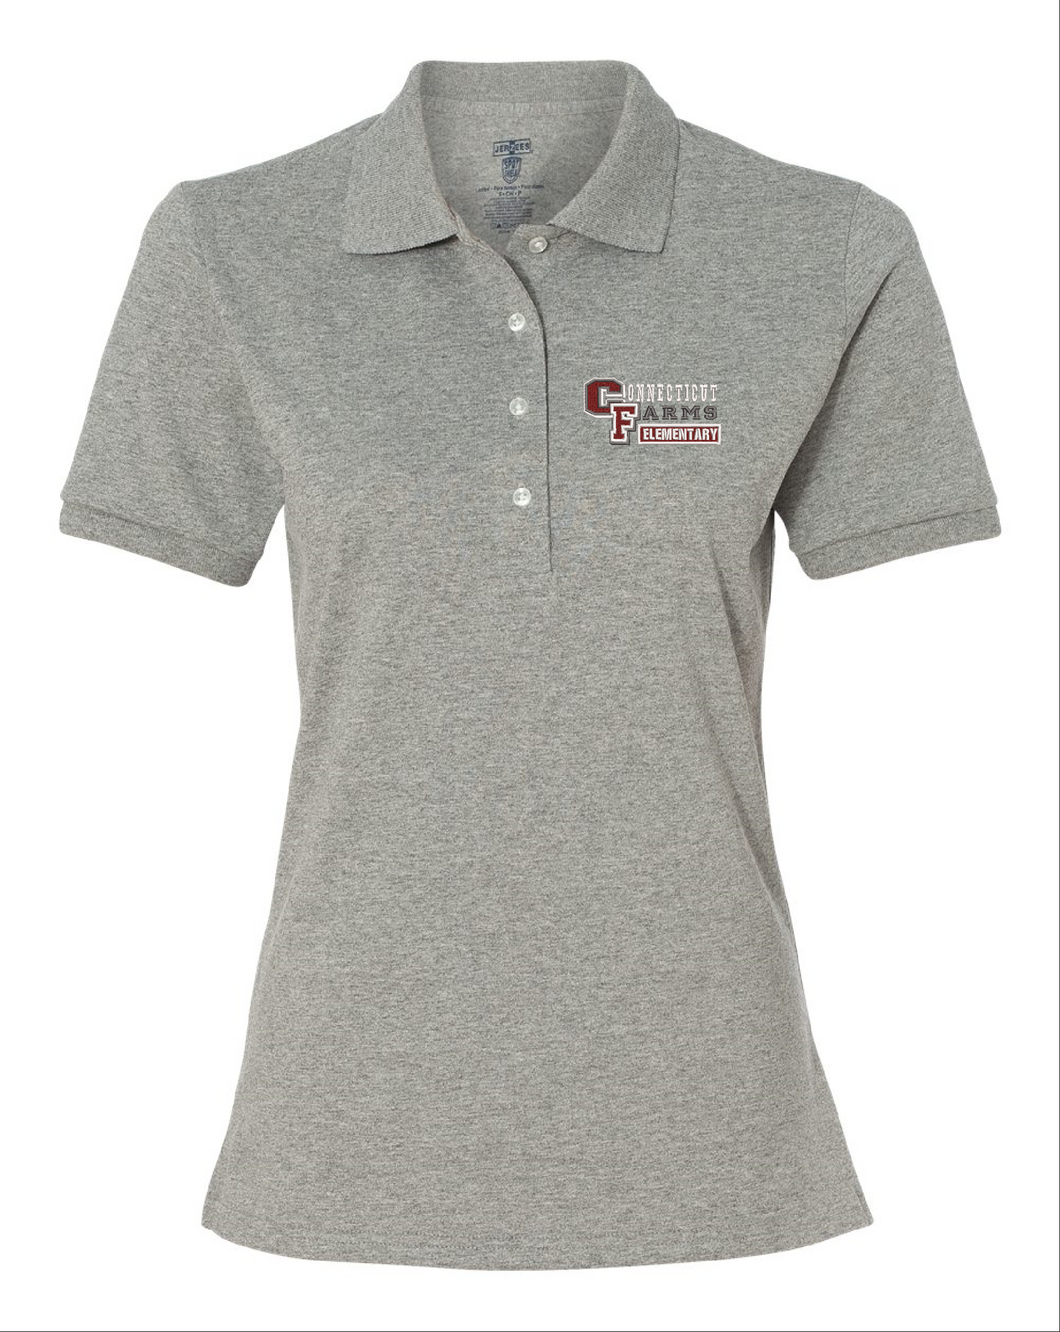 Connecticut Farms Elementary School LADIES embroidered polo